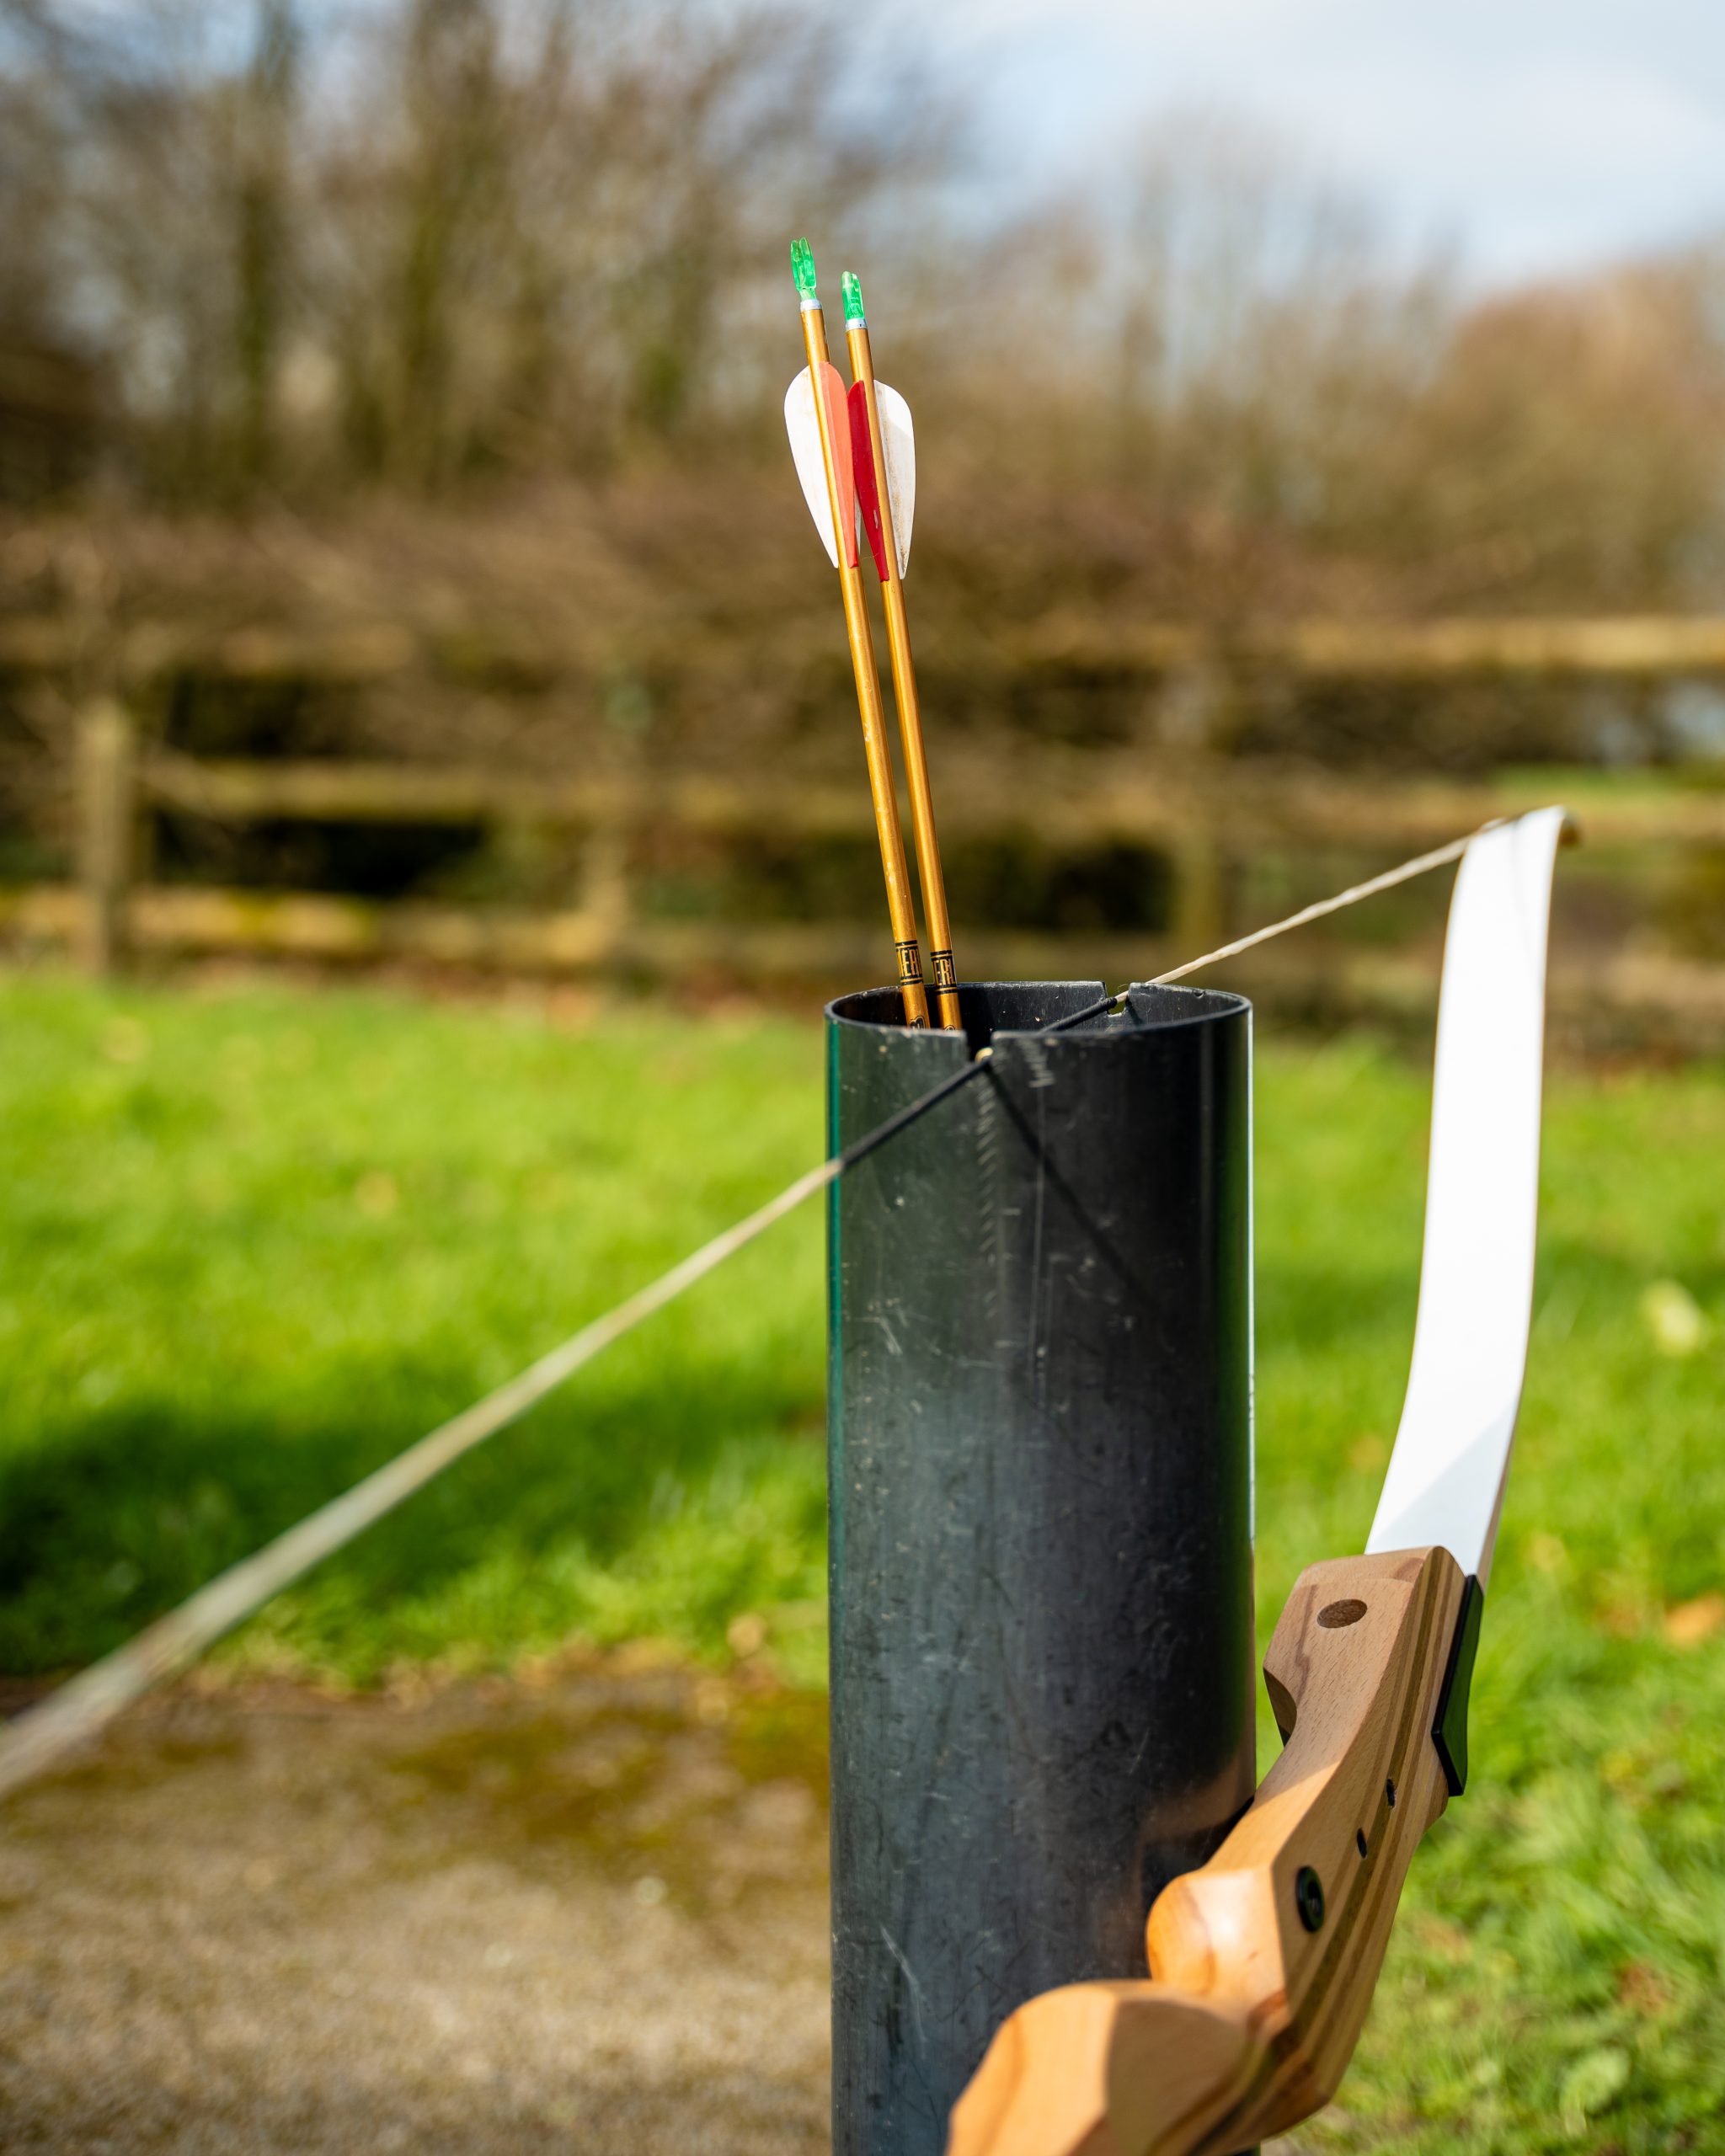 Two arrows are standing tip-down in a tube, with the string of a bow resting on top of the tube, the limbs of the bow hanging downwards.